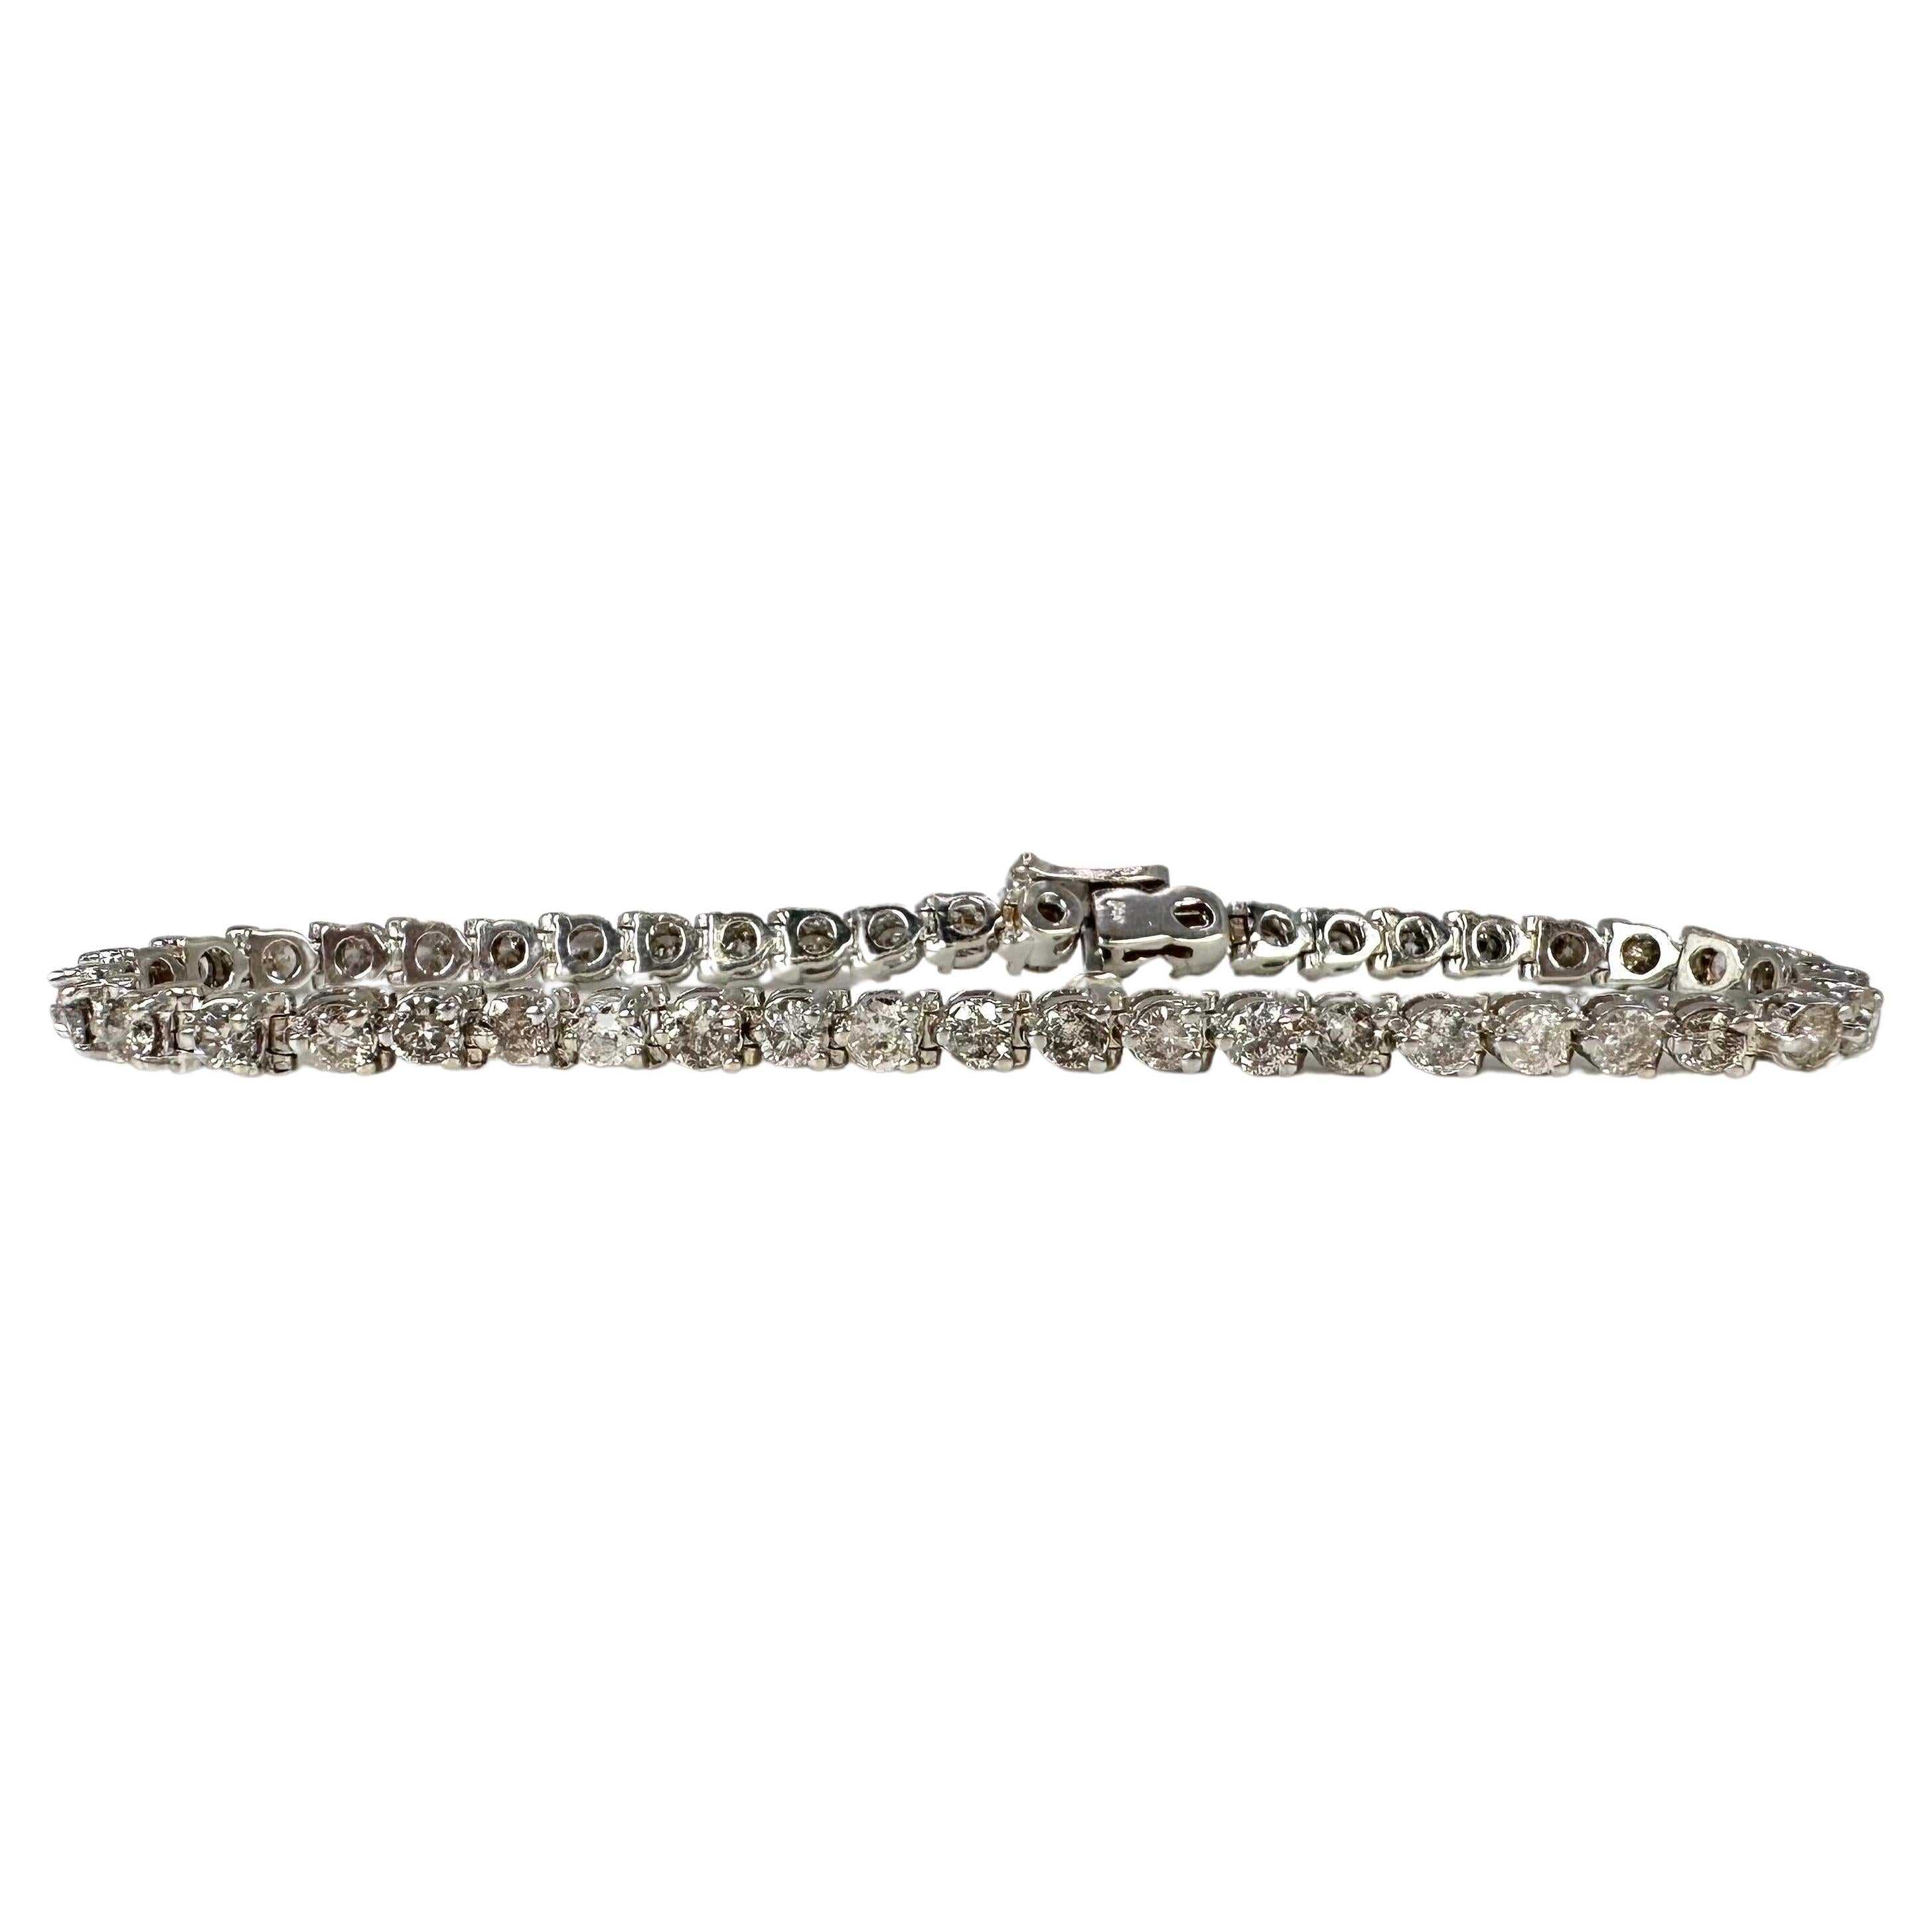 Beautiful classical diamond bracelet in 14KT white gold with 3 claw prong setting.

GOLD: 14KT gold
NATURAL DIAMOND(S)
Clarity/Color: SI-I/K-L-M
Carat:4.50ct
Cut:Round Brilliant
Grams:11.08
Item#: 170-00087MTTT

WHAT YOU GET AT STAMPAR